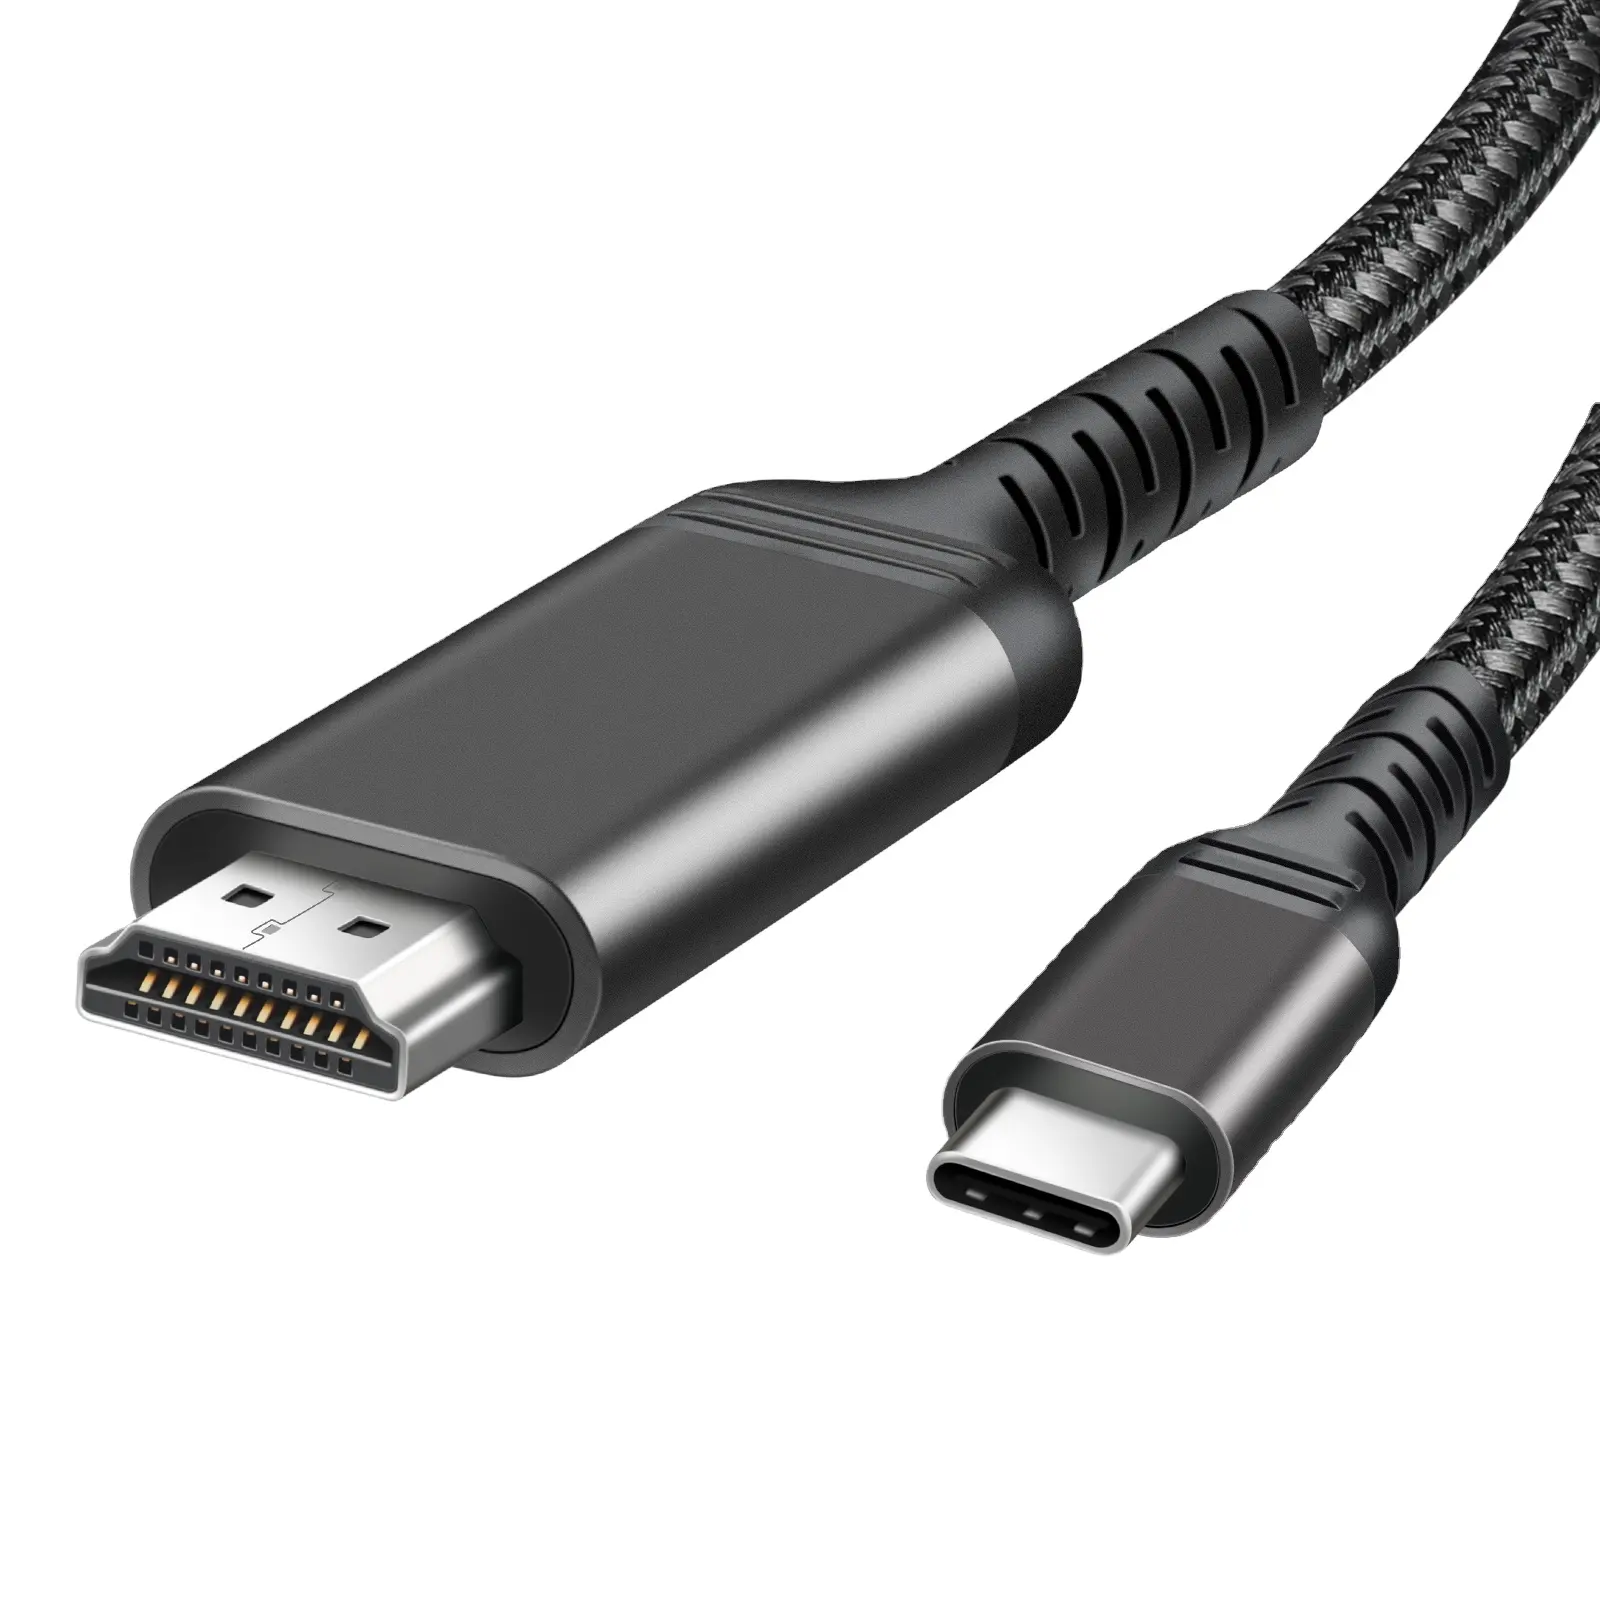 USB C to HDMI Cable Male to Male 4K60hz Type C to HDMI Cable Compatible for Computer/Desktop/Laptop